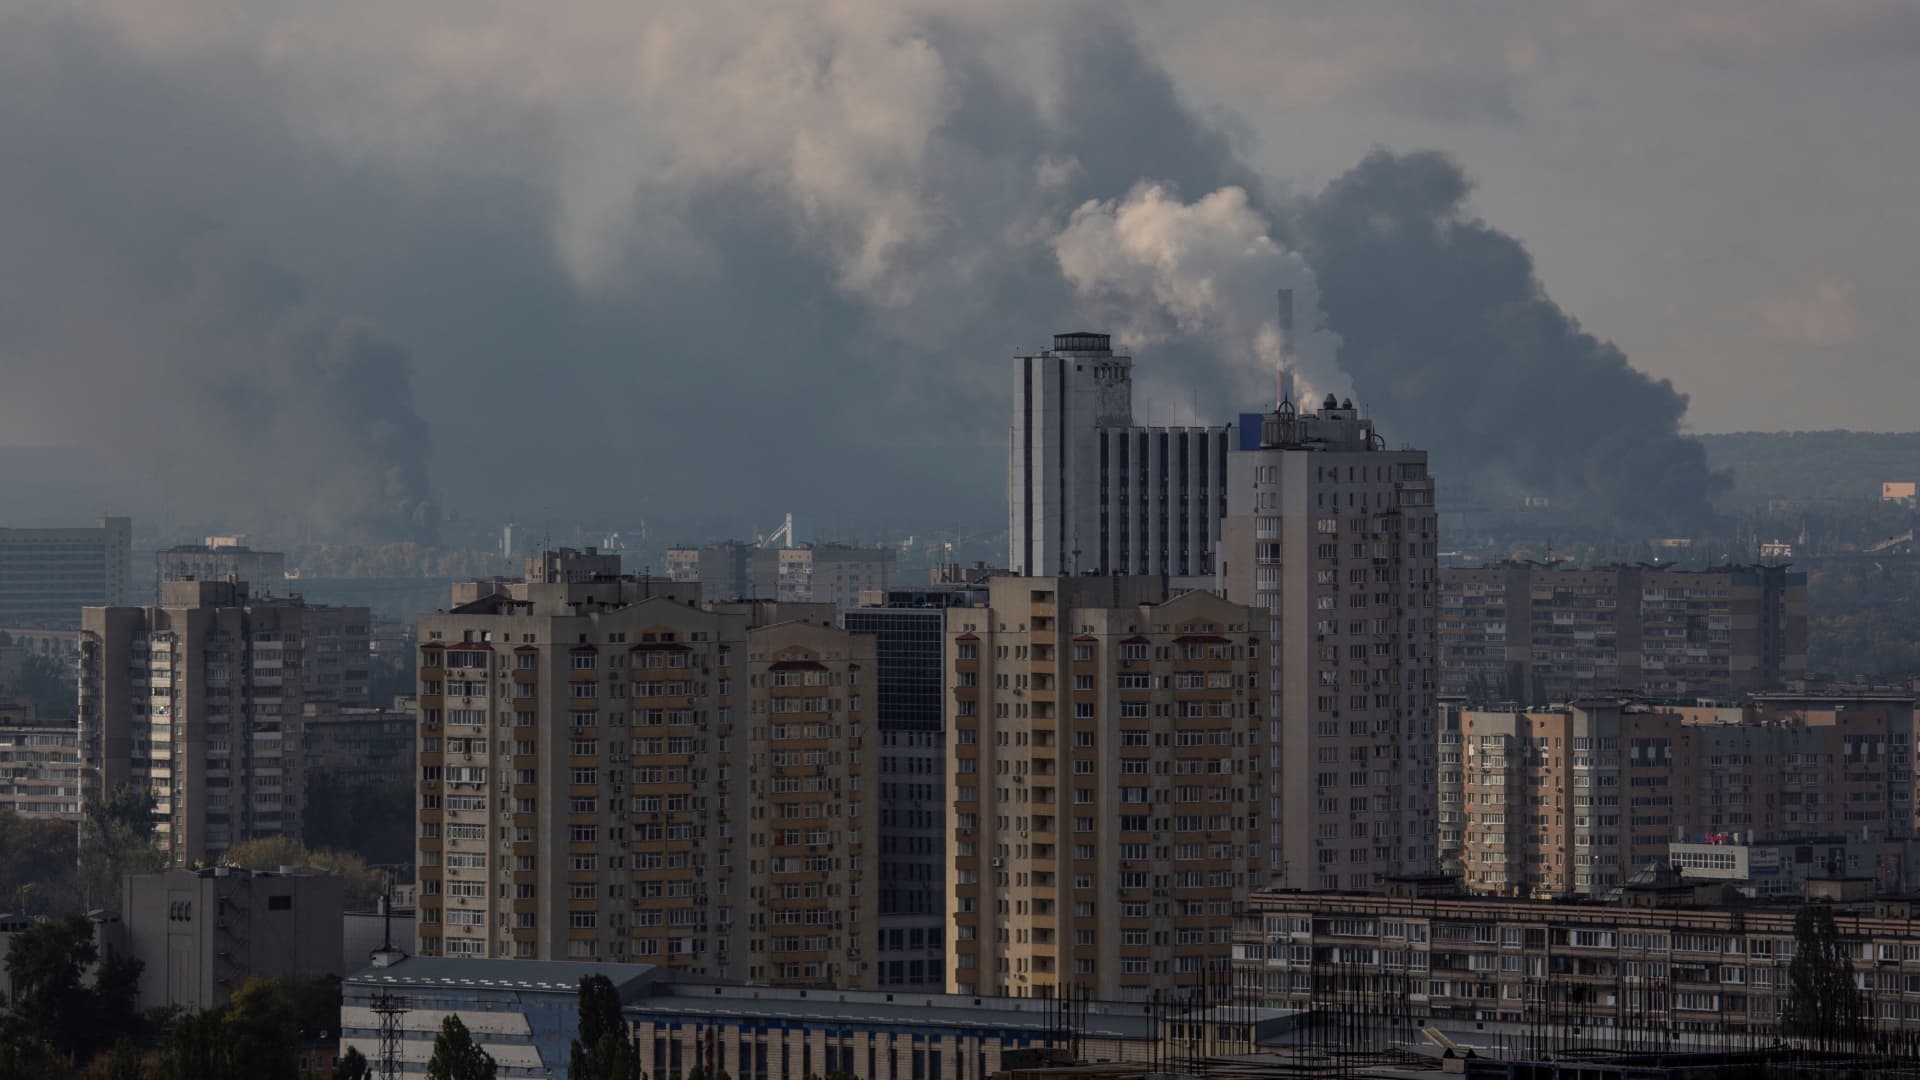 Smoke rises over the city after a Russian missile strike, amid Russia's attack on Ukraine, in Kyiv, Ukraine October 10, 2022.